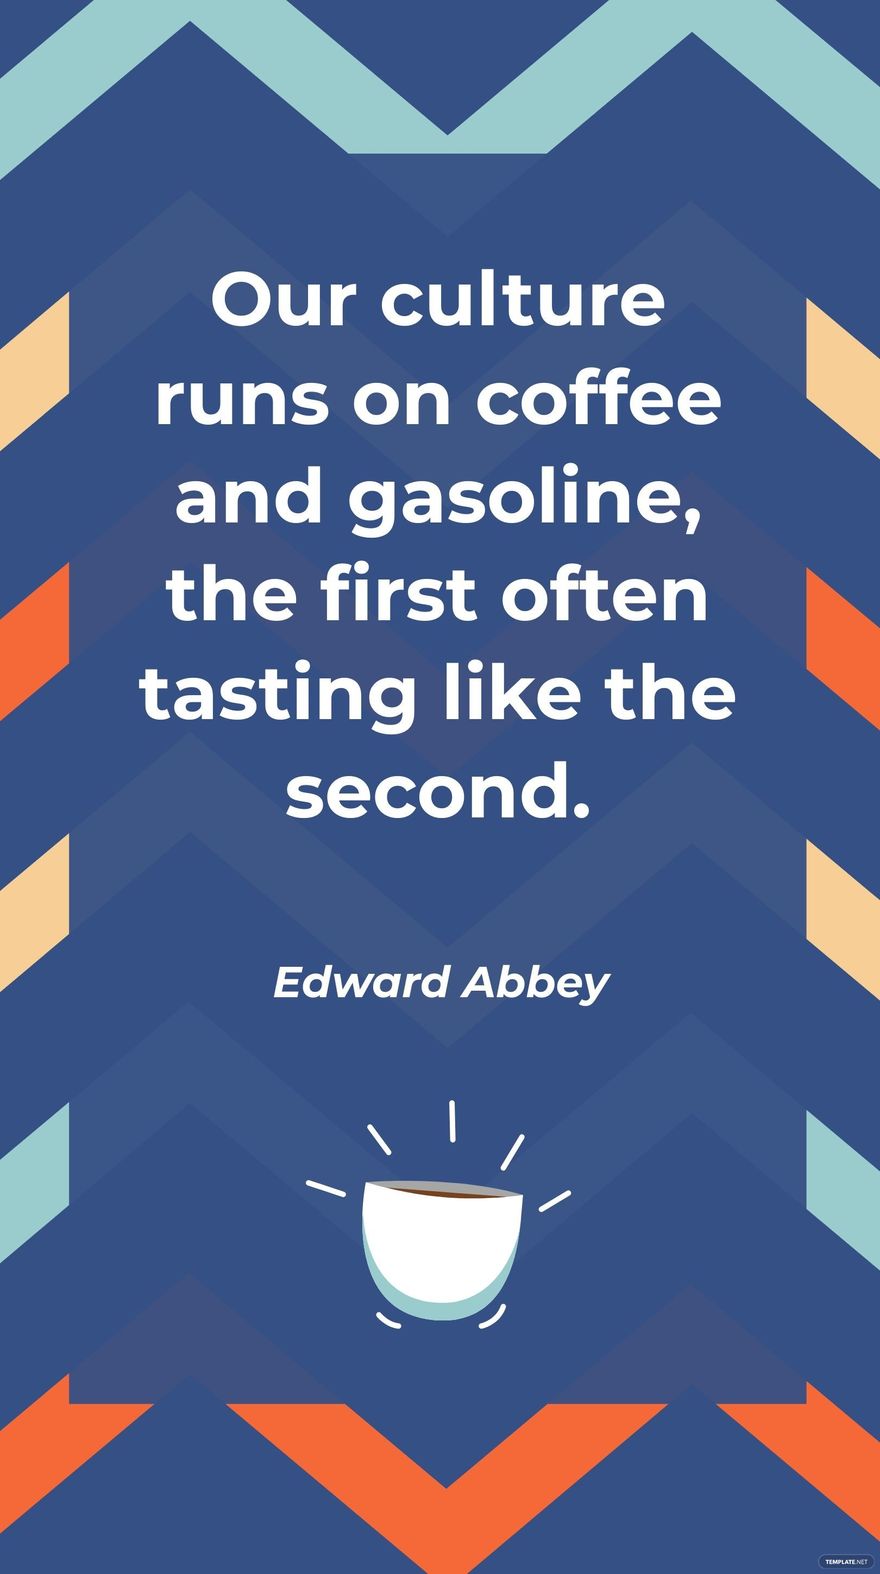 Edward Abbey - Our culture runs on coffee and gasoline, the first often tasting like the second.